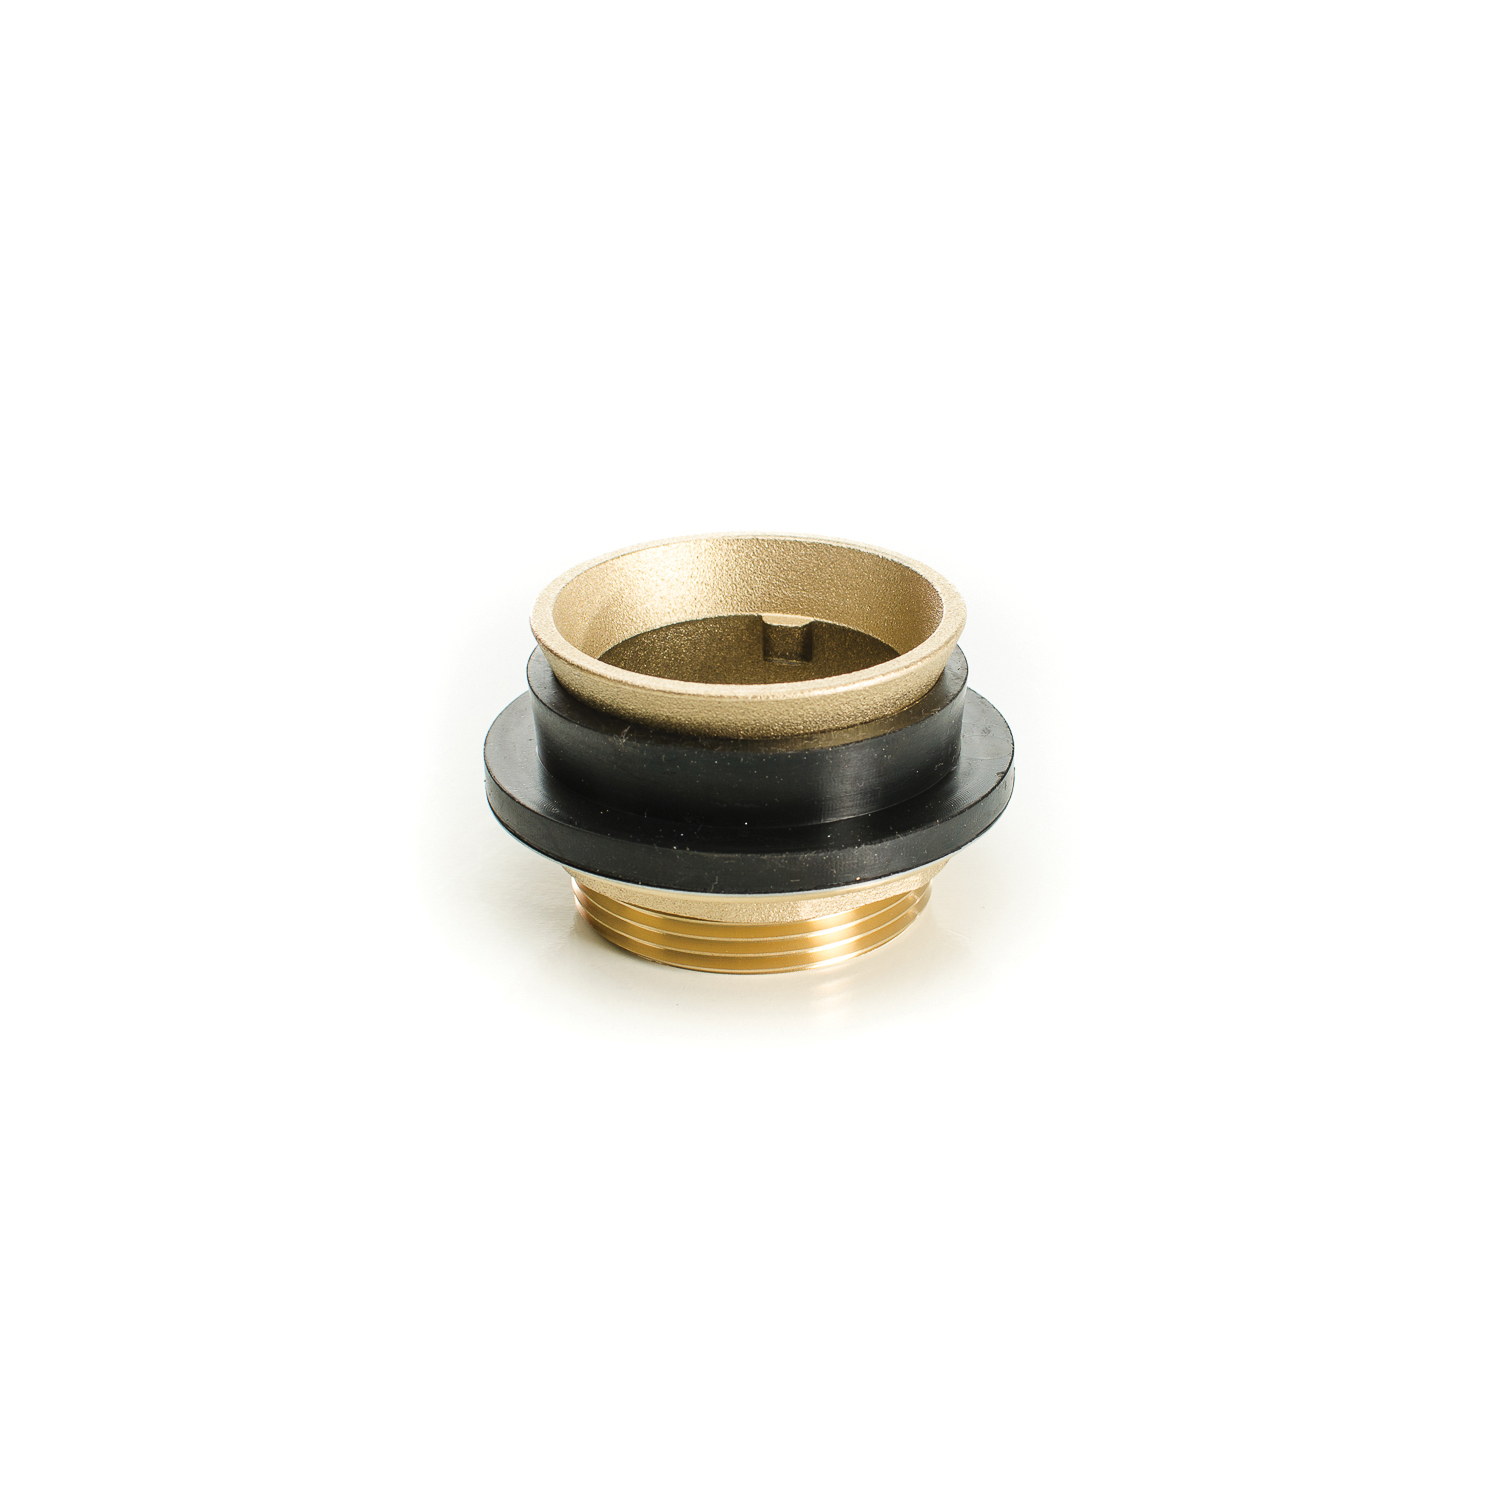 PASCO 959 Closet Spud With Brass Lock Nut, 1-1/2 in